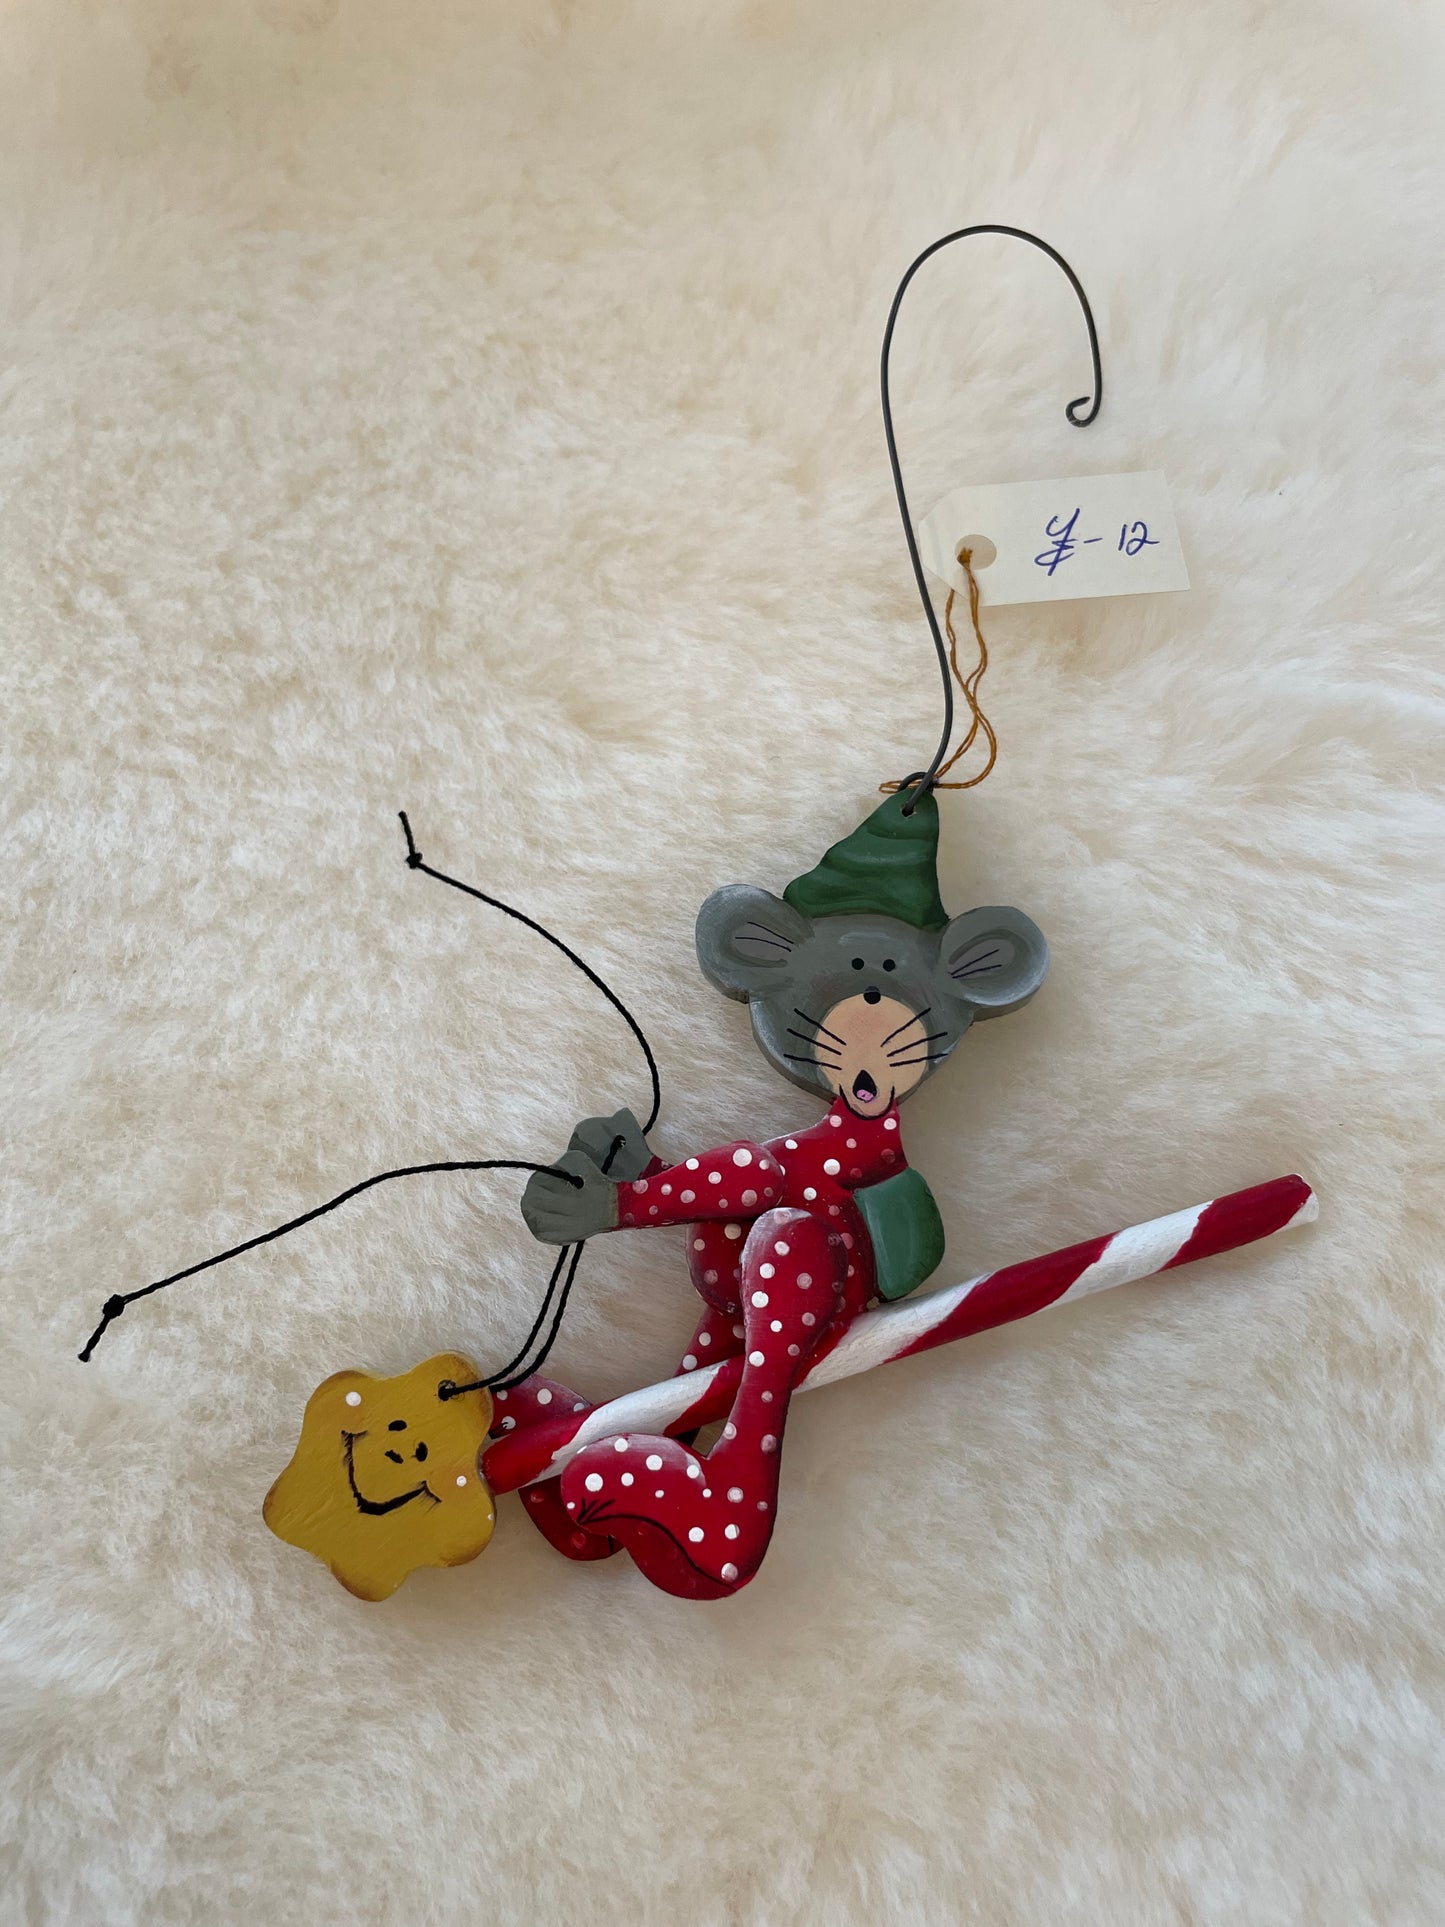 YE-05 Mice on Candy Cane Ornament - Wooden hand painted